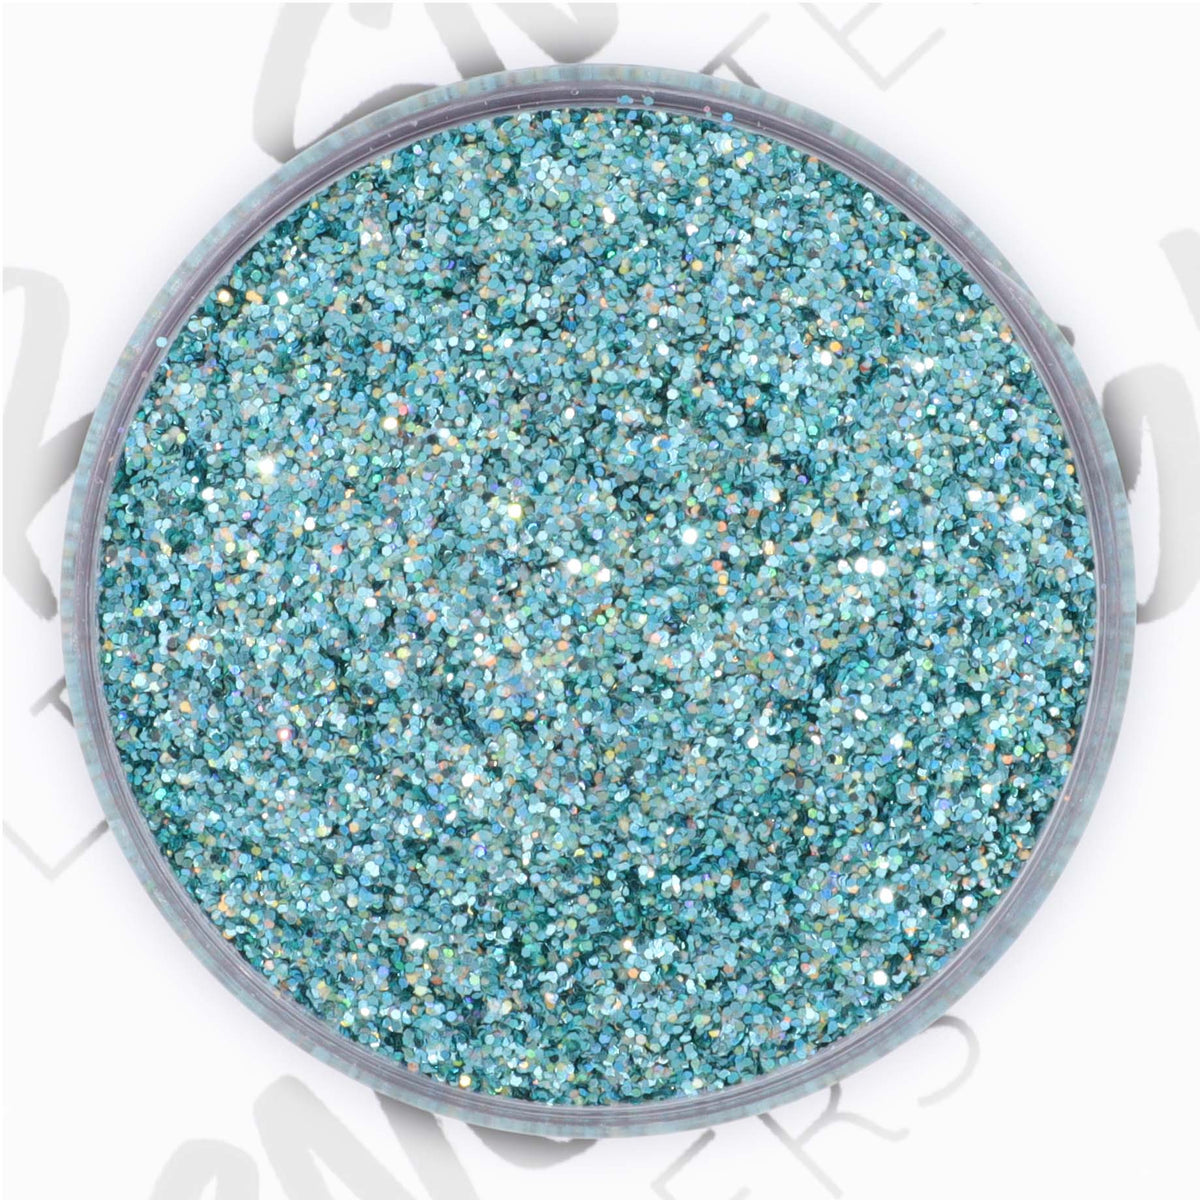 PEACHY OLIVE GLITTERS MOTHER EARTH CUSTOM MIX